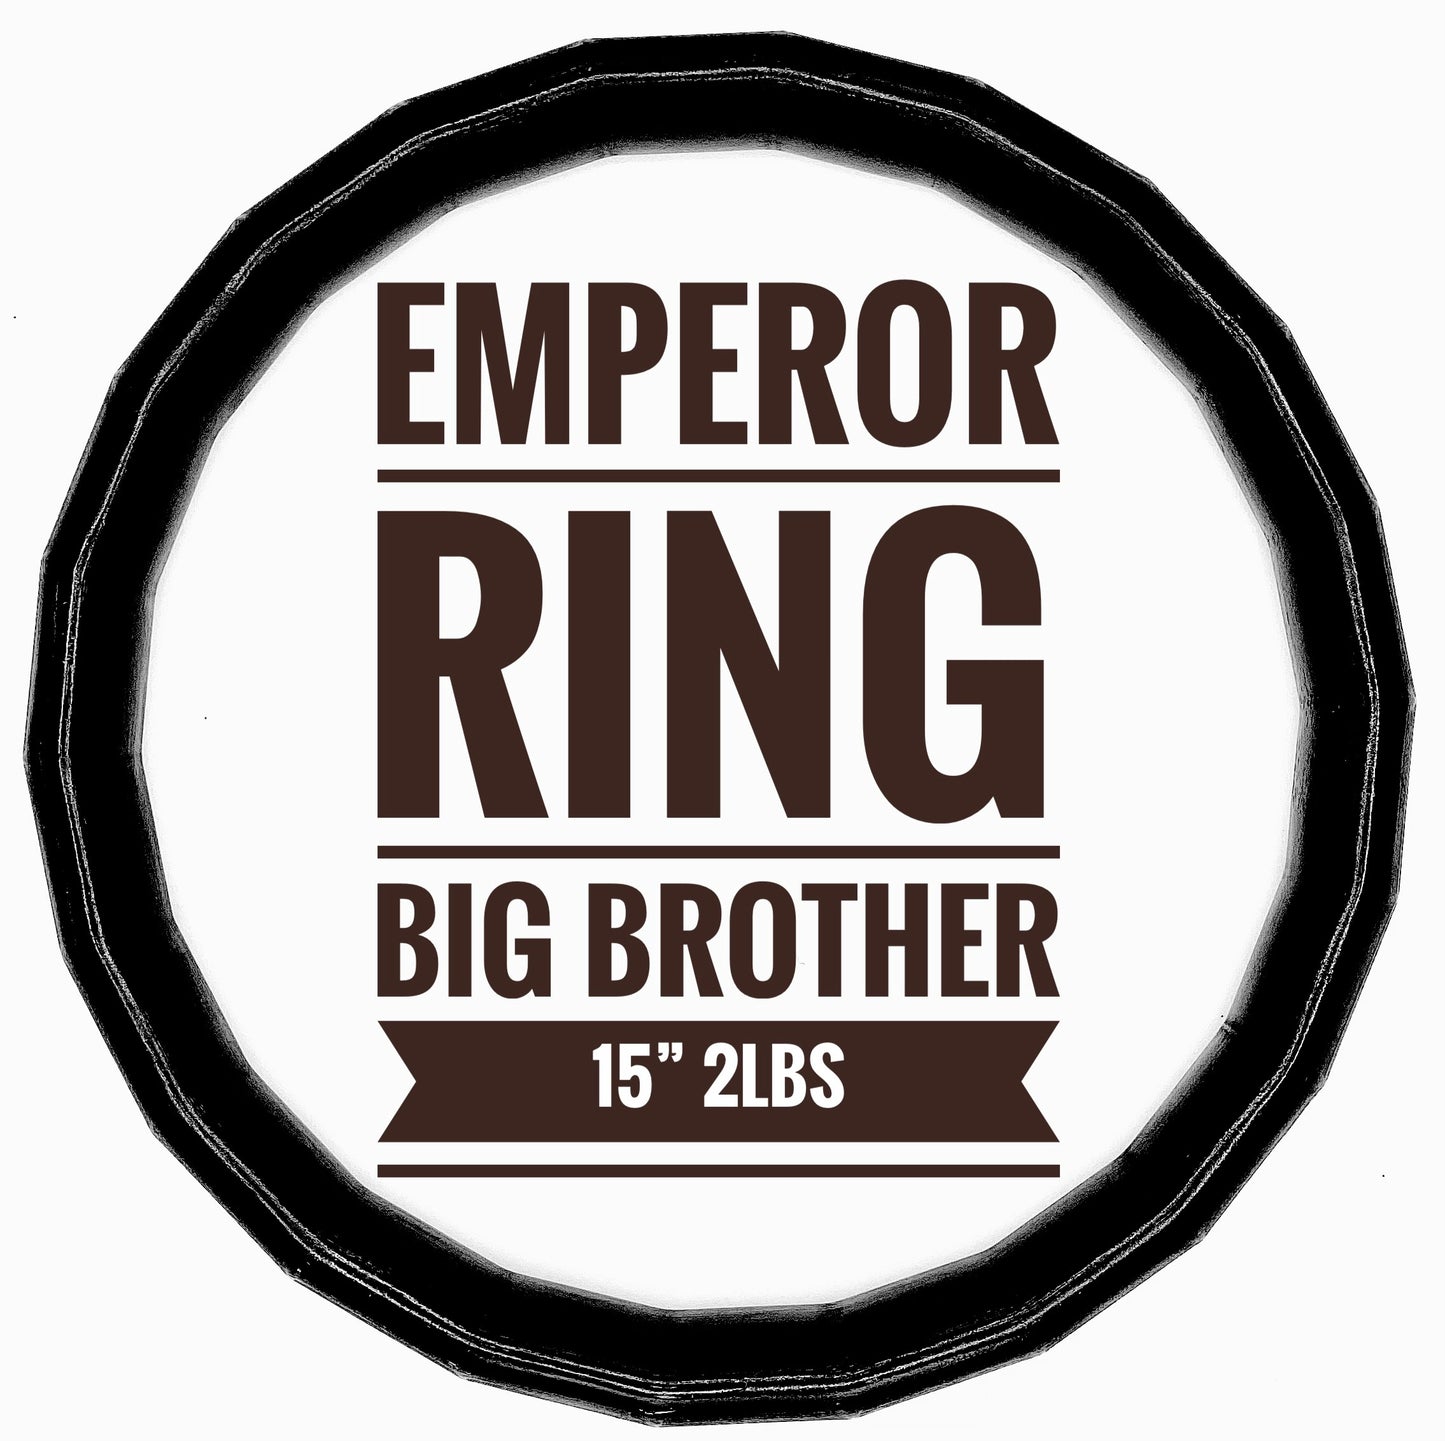 The Emperor Ring